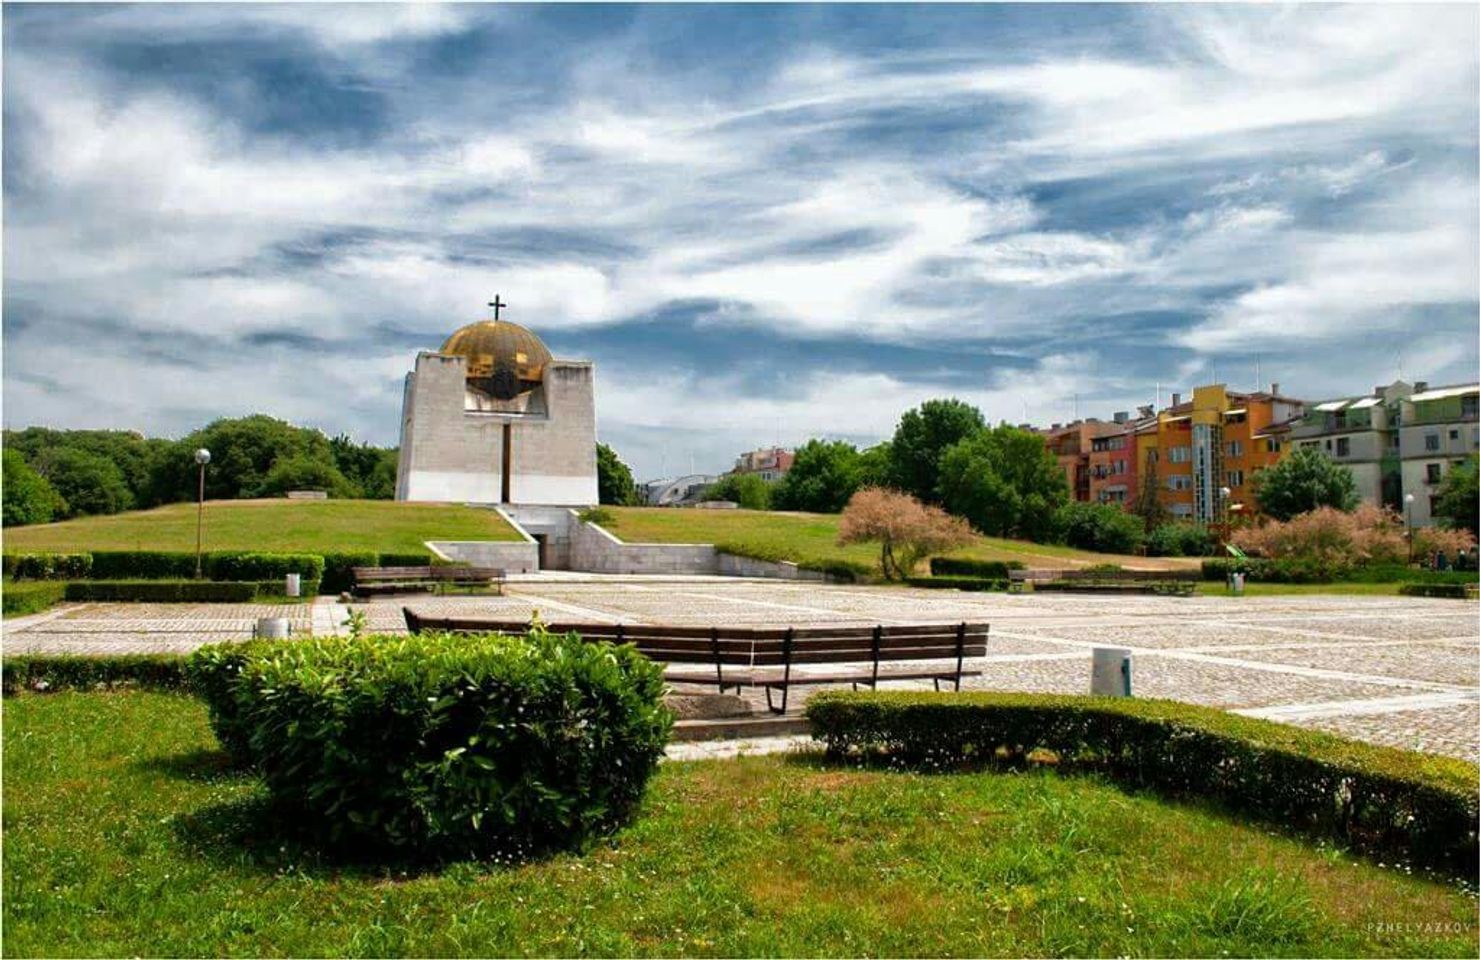 Uncover the Heroes of Bulgarias National Revival in Ruse